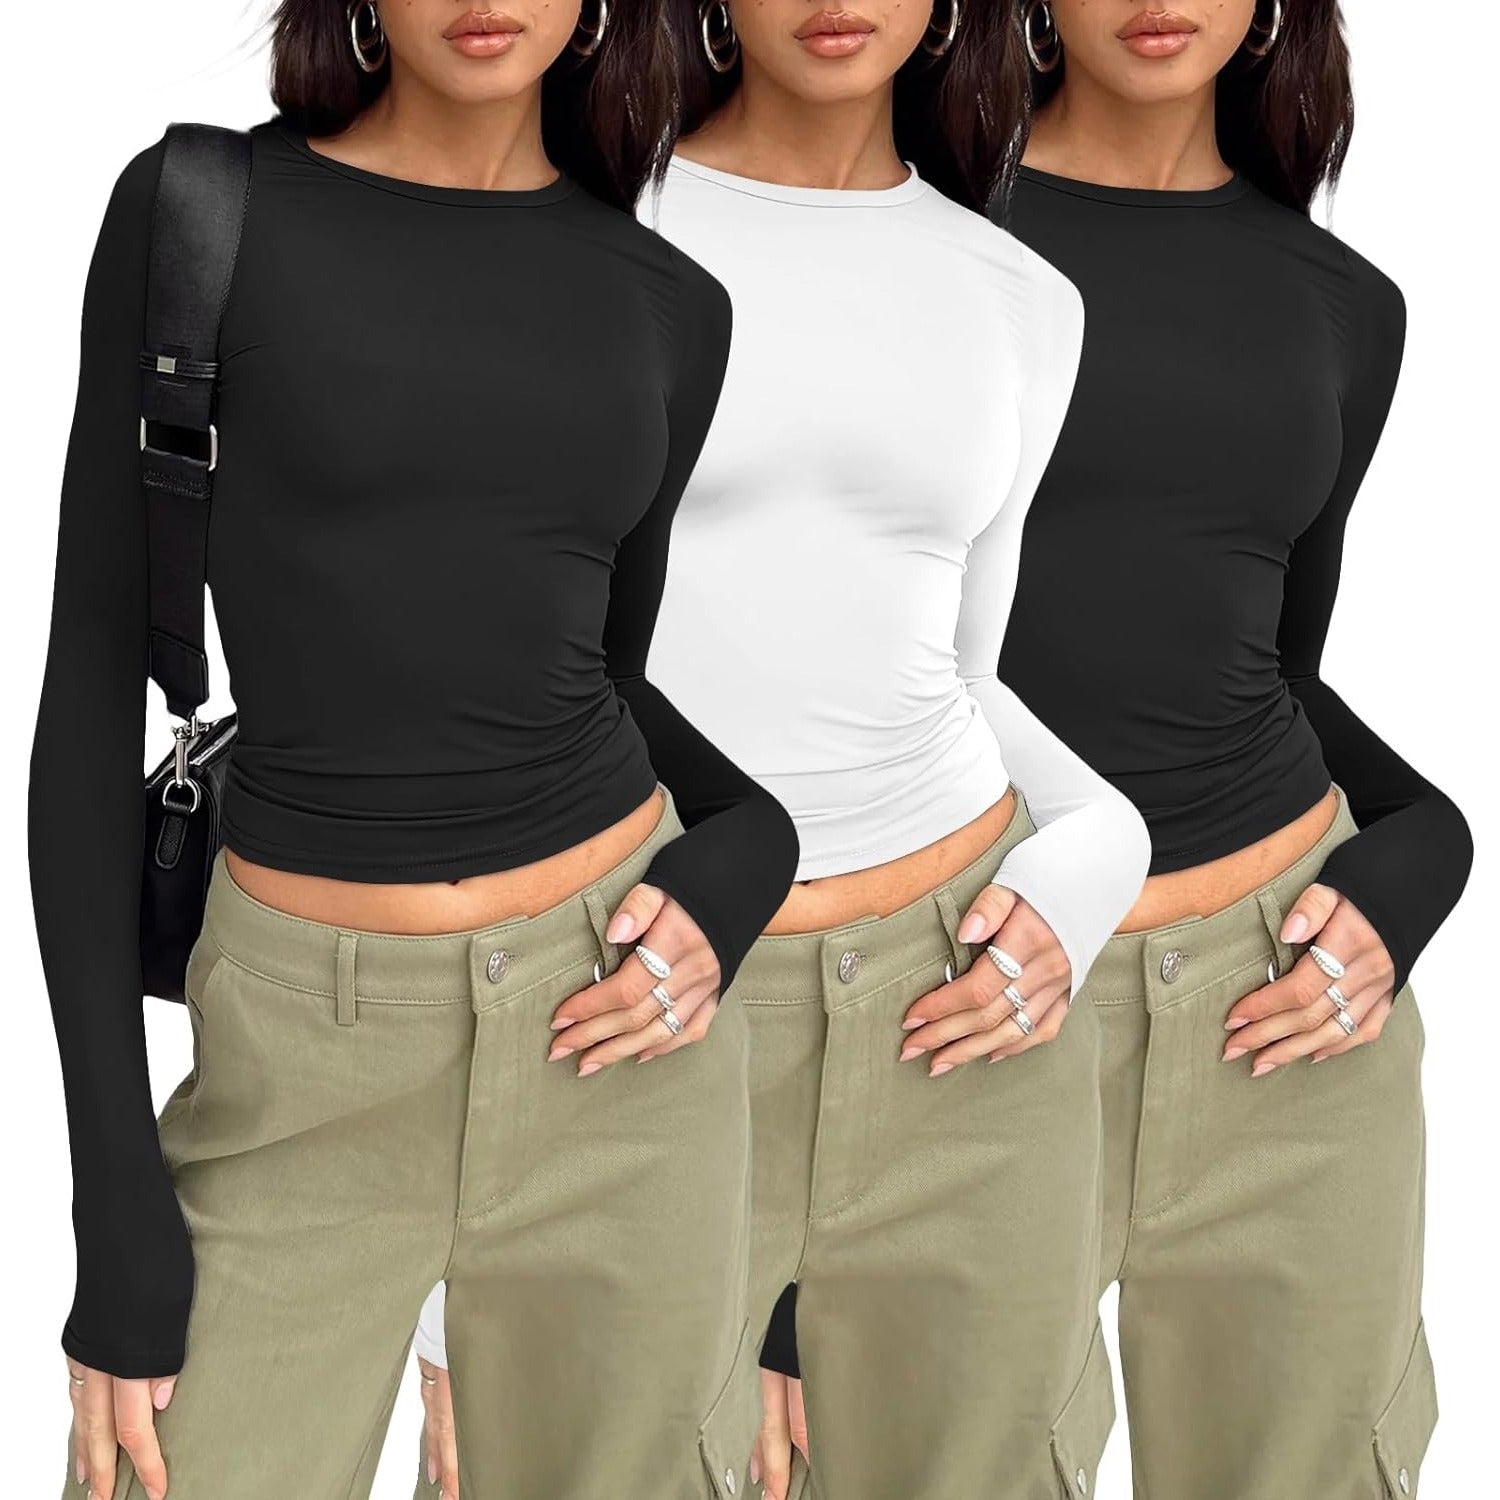 Womens 3 Piece Long Sleeve Shirts Basic Crop Tops Going Out Fall Fashion Underscrubs Layer Slim Fit Y2K Tops